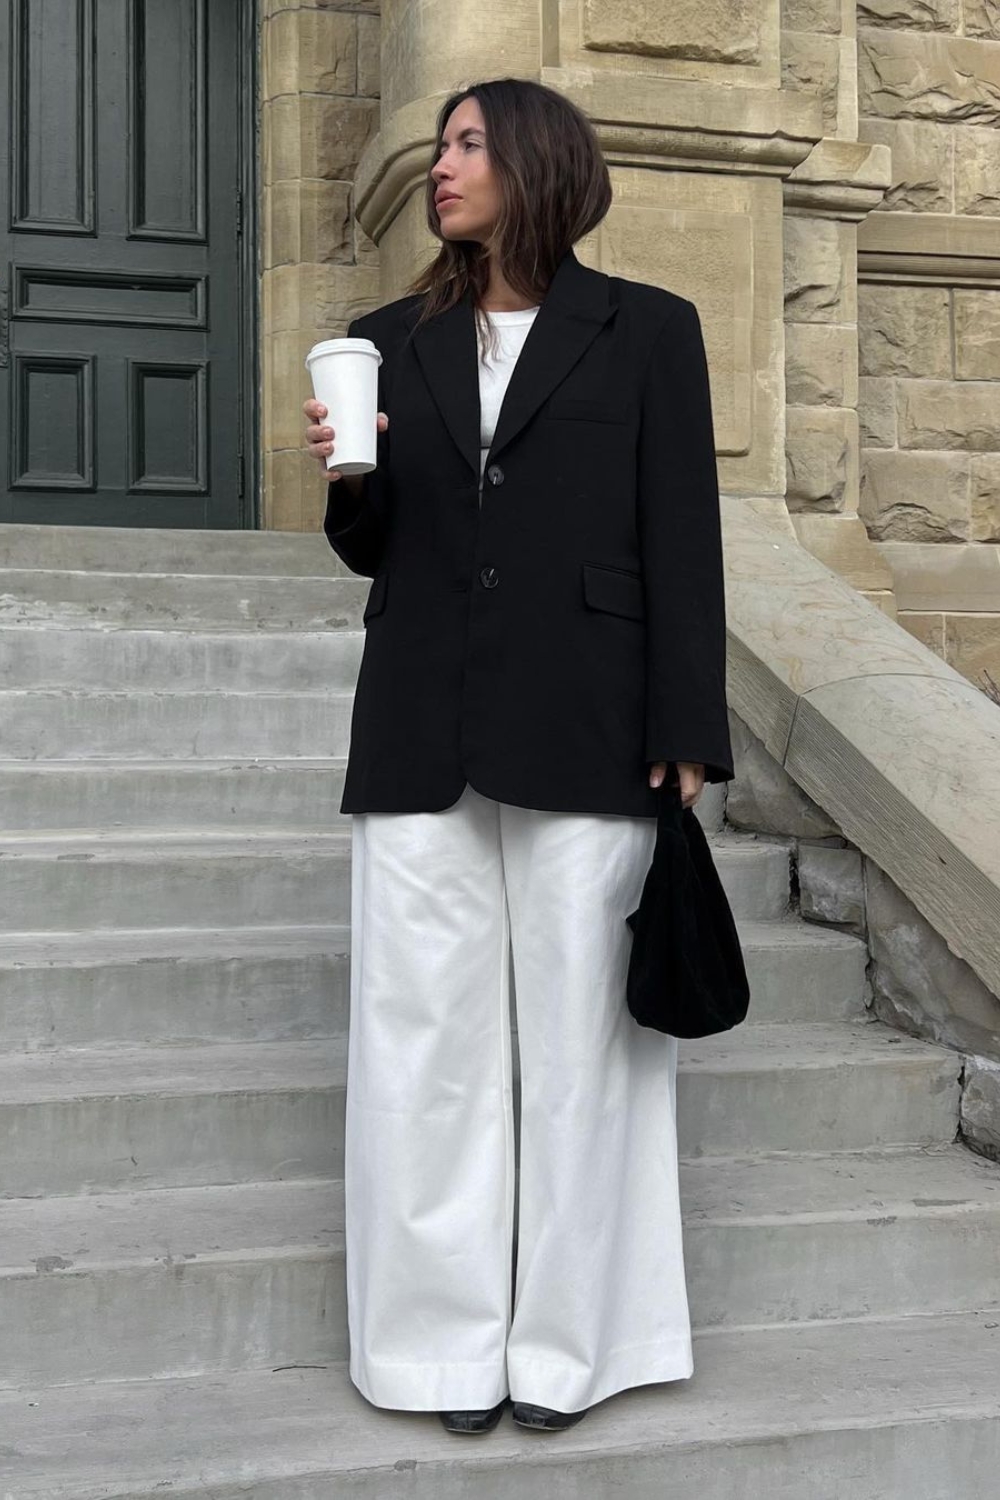 Black Blazer with white jeans and white tee outfit for work